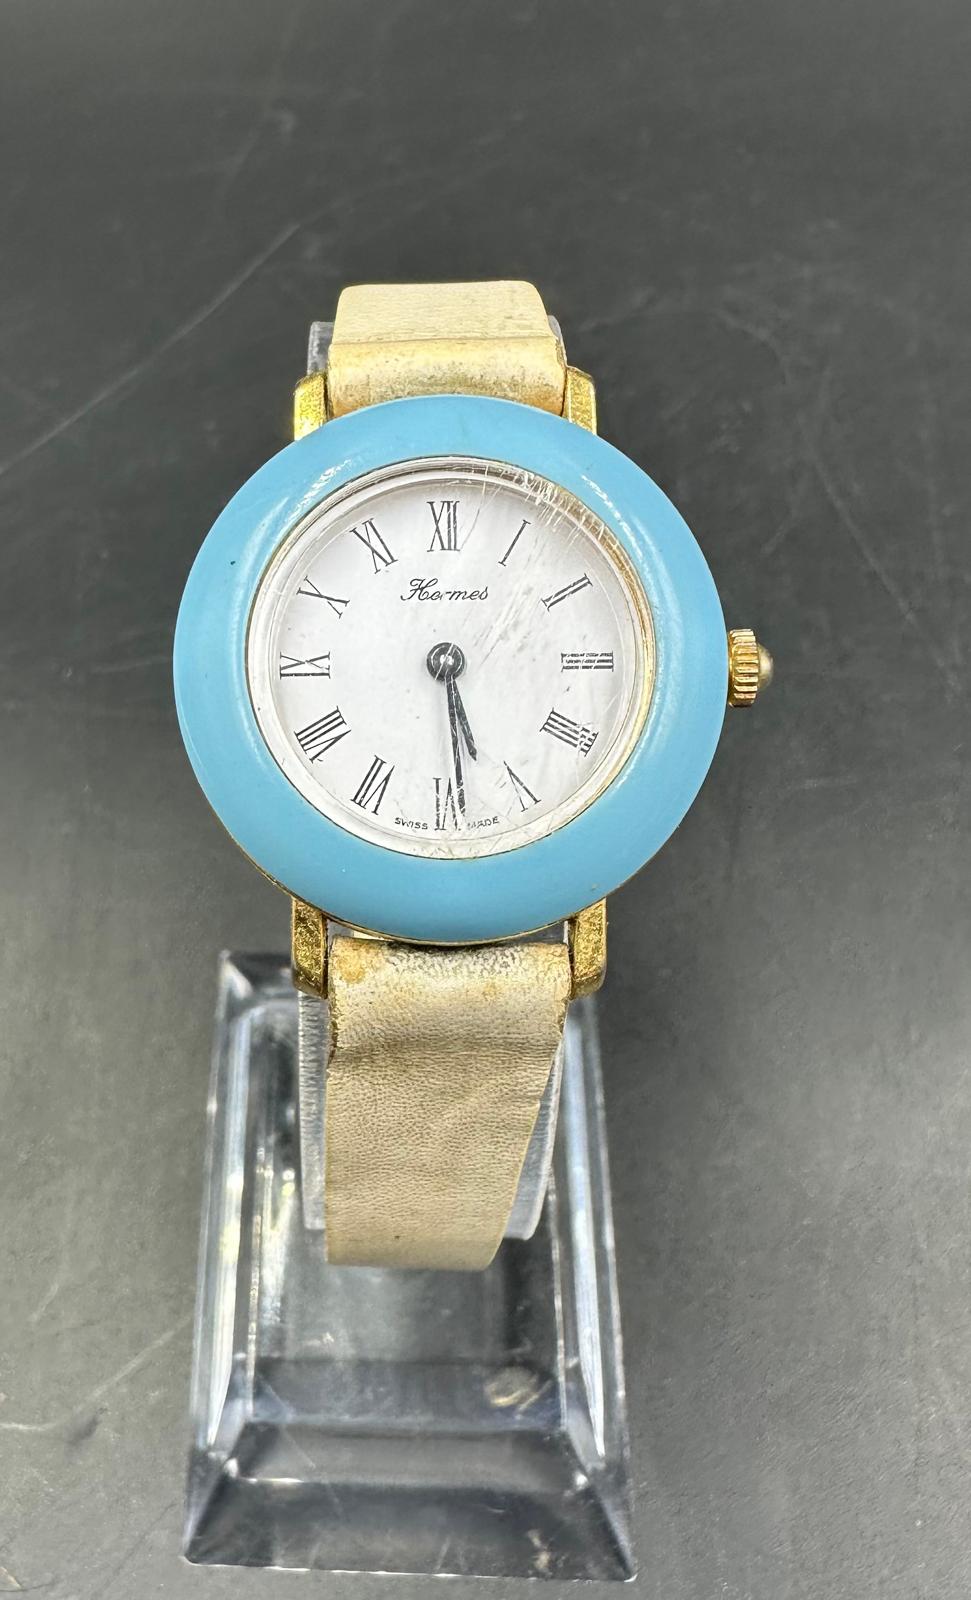 A vintage Hermes, blue bezel watch on stainless steel with white leather strap.